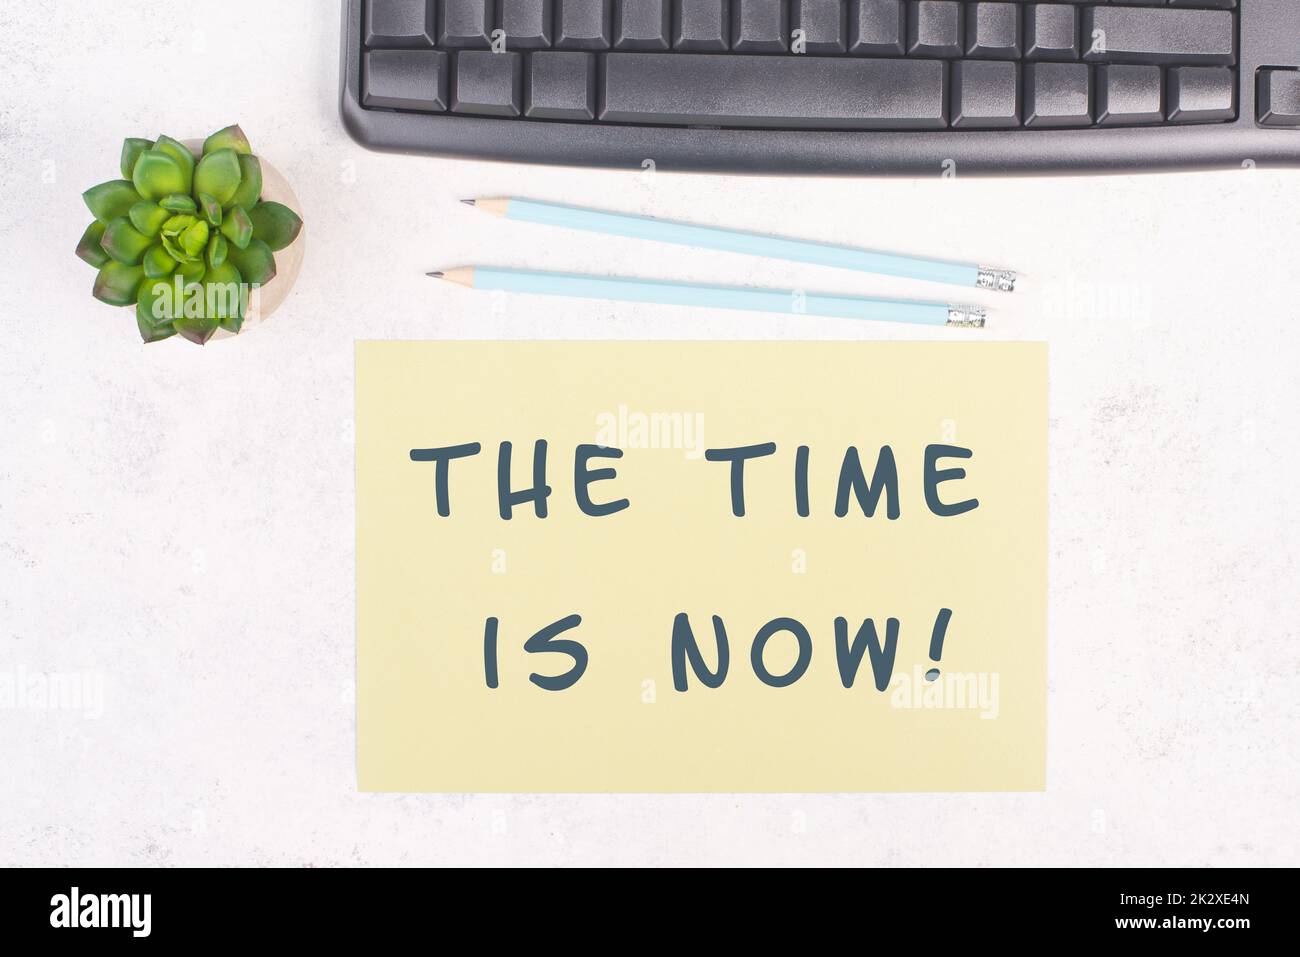 The phrase the time is now is standing on a paper, a pen, computer keyboard and a cactus, brainstorming for new business ideas, startup concept, home office desk Stock Photo